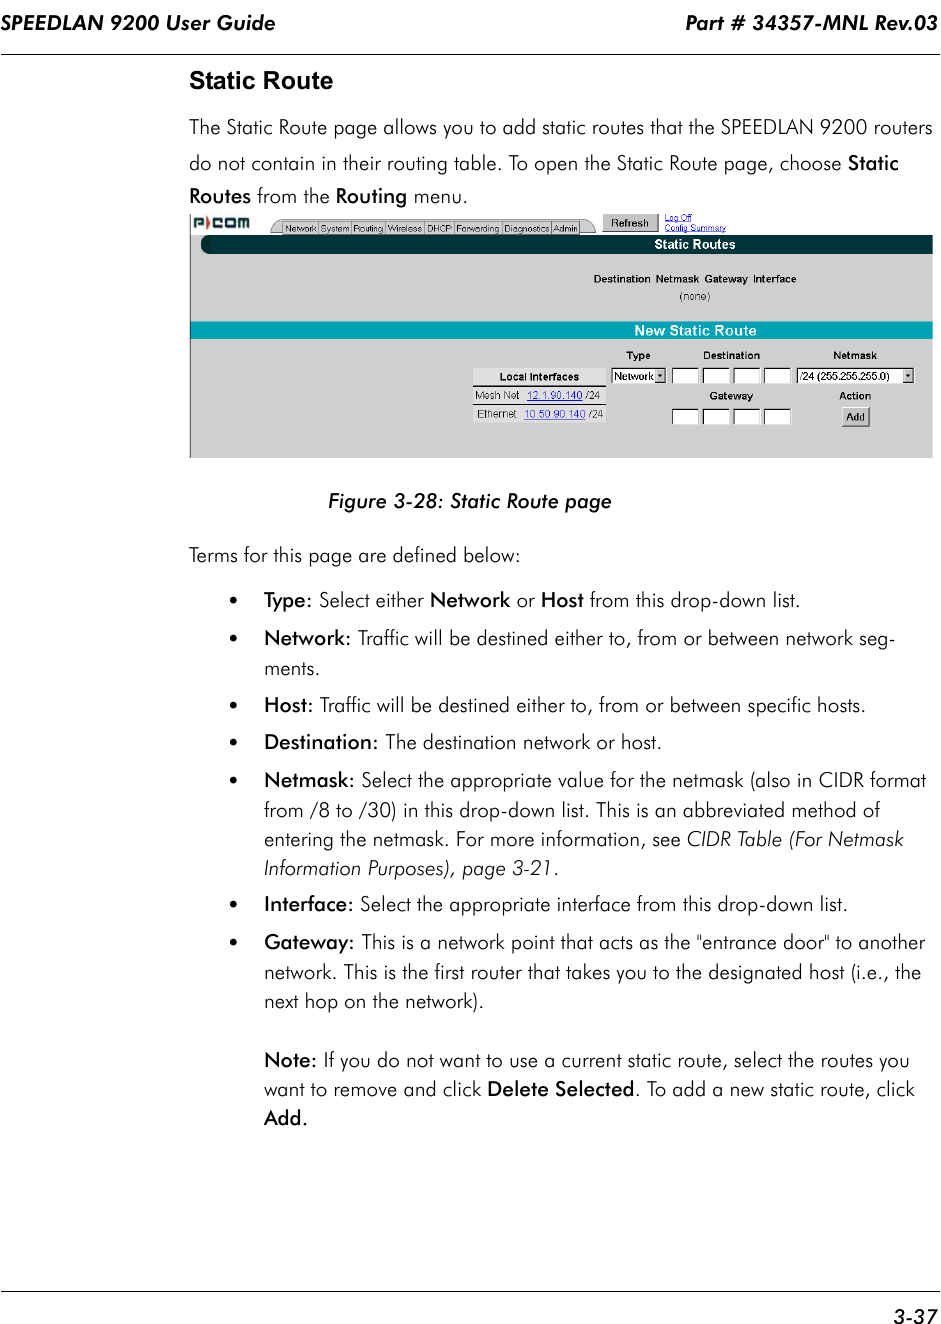 SPEEDLAN 9200 User Guide                                                                    Part # 34357-MNL Rev.03      3-37                                                                                                                                                              Static RouteThe Static Route page allows you to add static routes that the SPEEDLAN 9200 routers do not contain in their routing table. To open the Static Route page, choose Static Routes from the Routing menu.  Figure 3-28: Static Route pageTerms for this page are defined below:•Type: Select either Network or Host from this drop-down list. •Network: Traffic will be destined either to, from or between network seg-ments. •Host: Traffic will be destined either to, from or between specific hosts.•Destination: The destination network or host.•Netmask: Select the appropriate value for the netmask (also in CIDR format from /8 to /30) in this drop-down list. This is an abbreviated method of entering the netmask. For more information, see CIDR Table (For Netmask Information Purposes), page 3-21.•Interface: Select the appropriate interface from this drop-down list.•Gateway: This is a network point that acts as the &quot;entrance door&quot; to another network. This is the first router that takes you to the designated host (i.e., the next hop on the network). Note: If you do not want to use a current static route, select the routes you want to remove and click Delete Selected. To add a new static route, click Add....